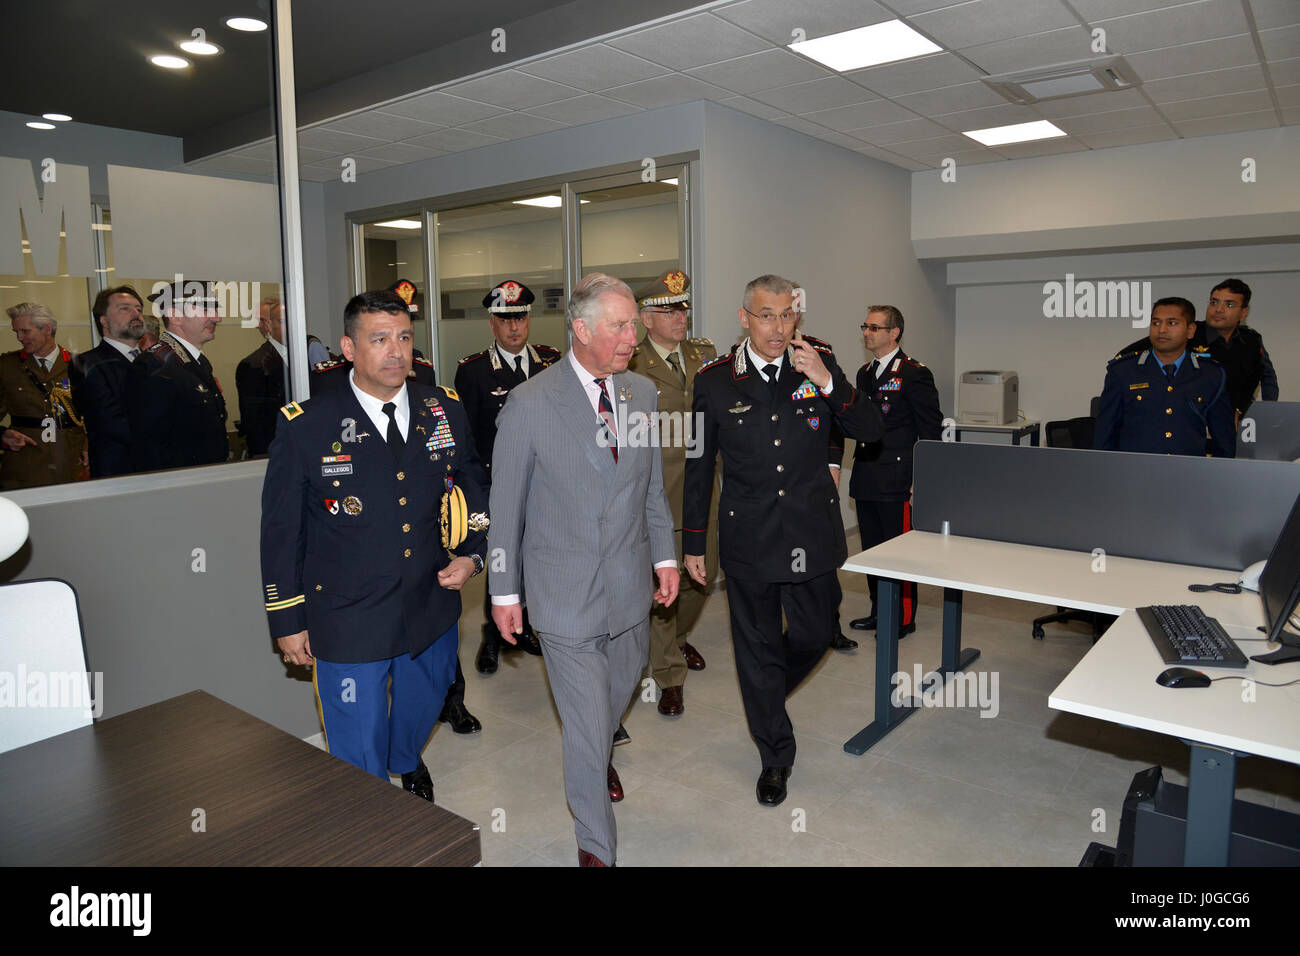 The Royal Highness, Prince Charles, Prince of Wales, observes the training room 'Magistra' during visit at Center of Excellence for Stability Police Units (CoESPU) Vicenza, Italy, April 1, 2017. (U.S. Army Photo by Visual Information Specialist Antonio Bedin/released) Stock Photo